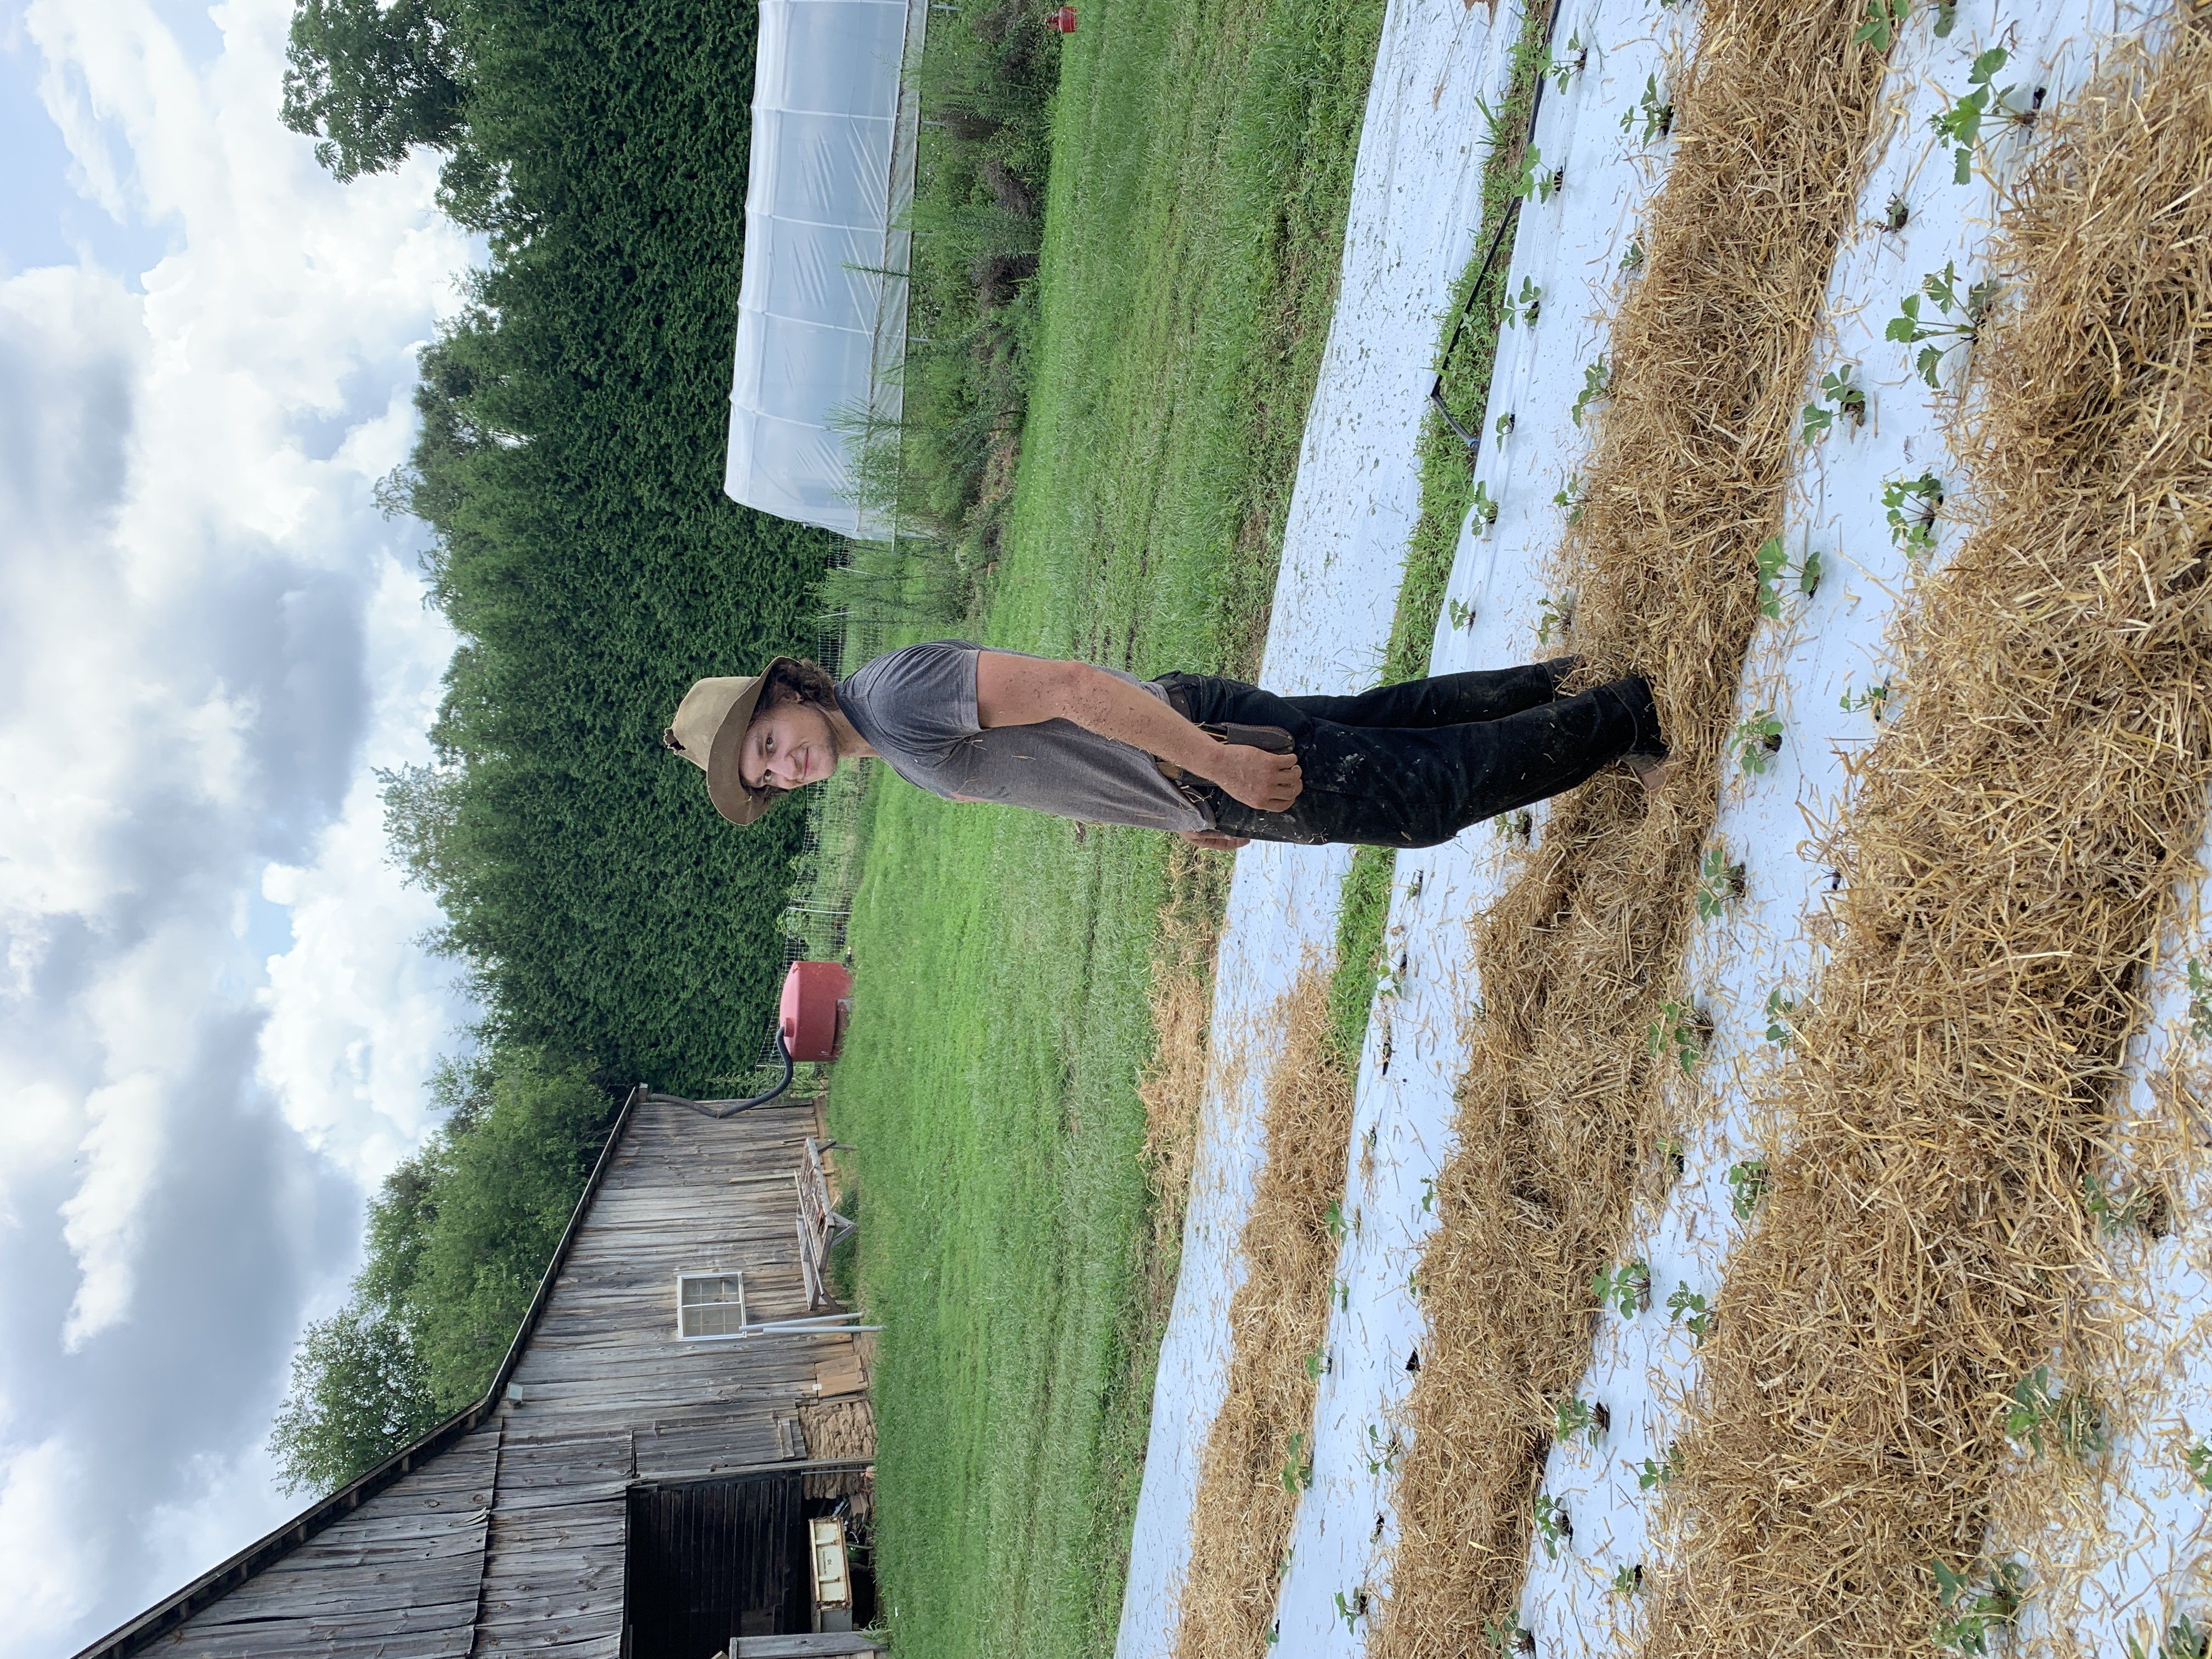 Previous Happening: Farm Happenings for August 11, 2020